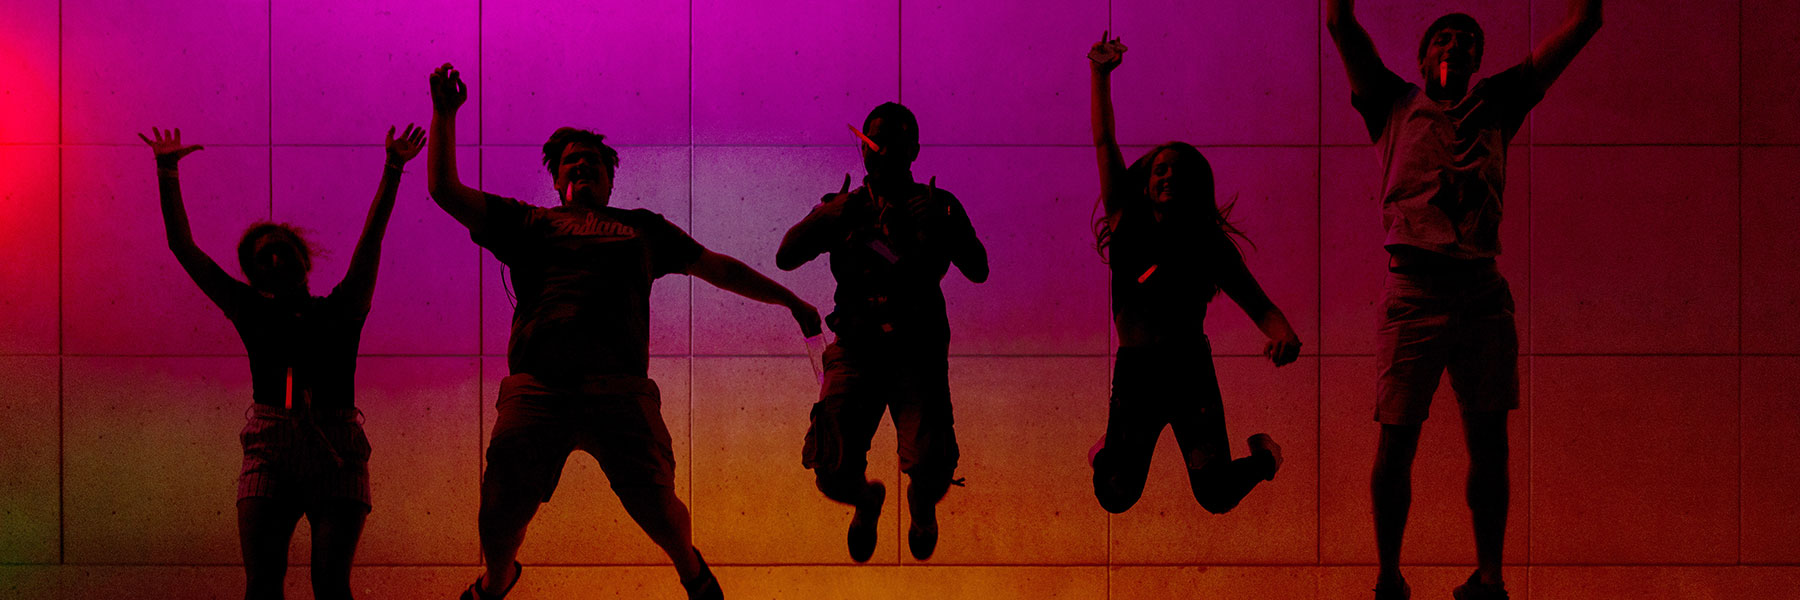 Students jumping in the air at night in front of colored lights.